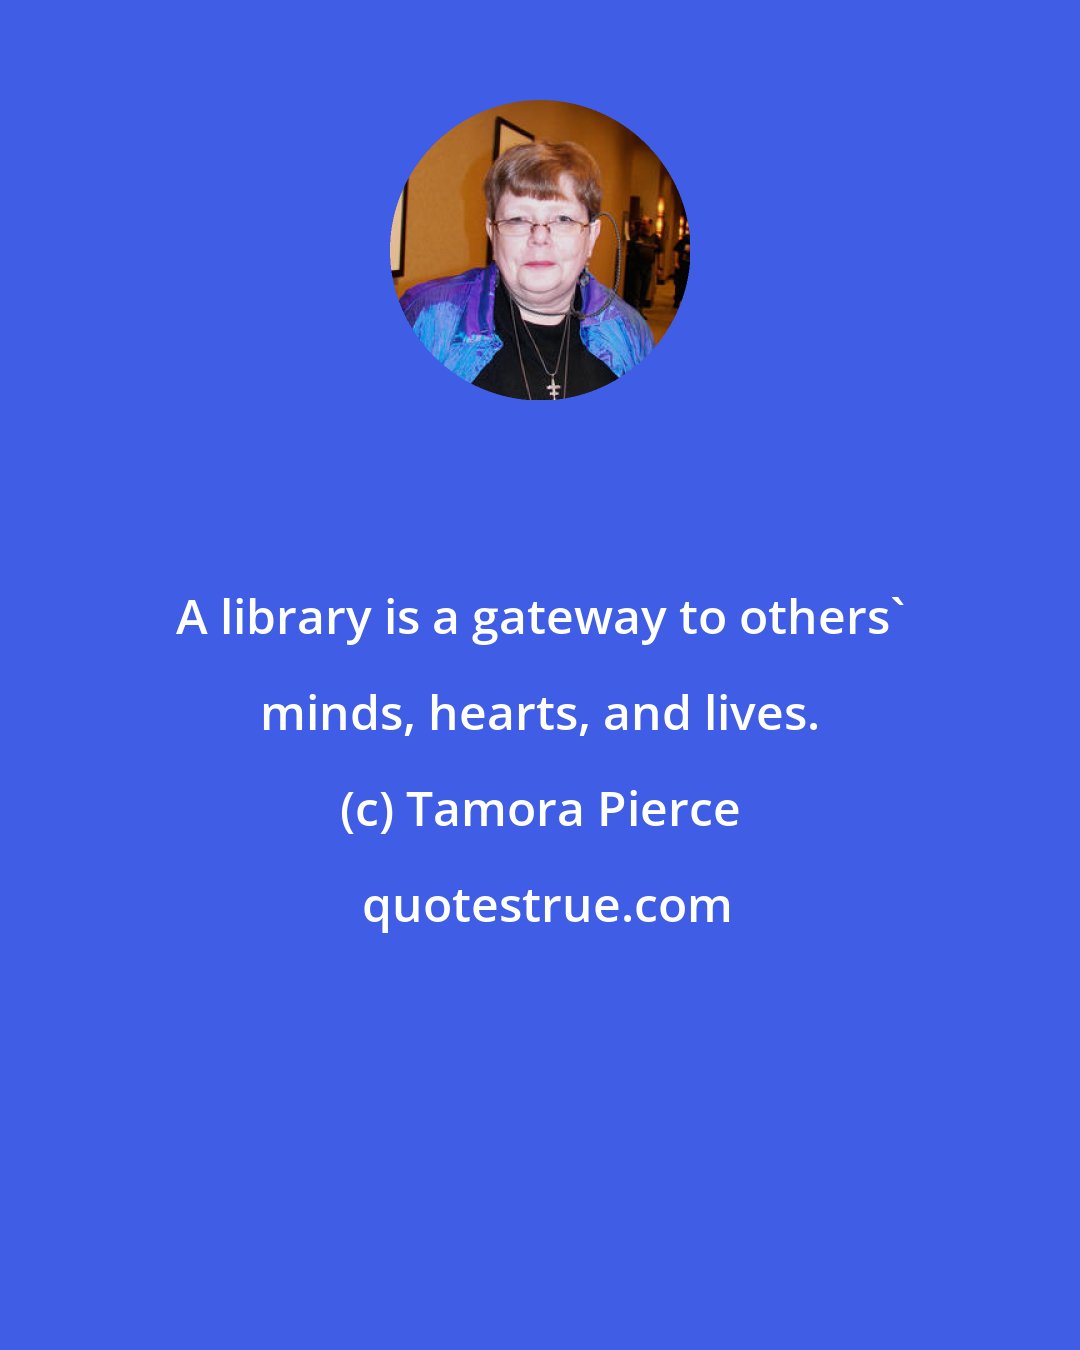 Tamora Pierce: A library is a gateway to others' minds, hearts, and lives.